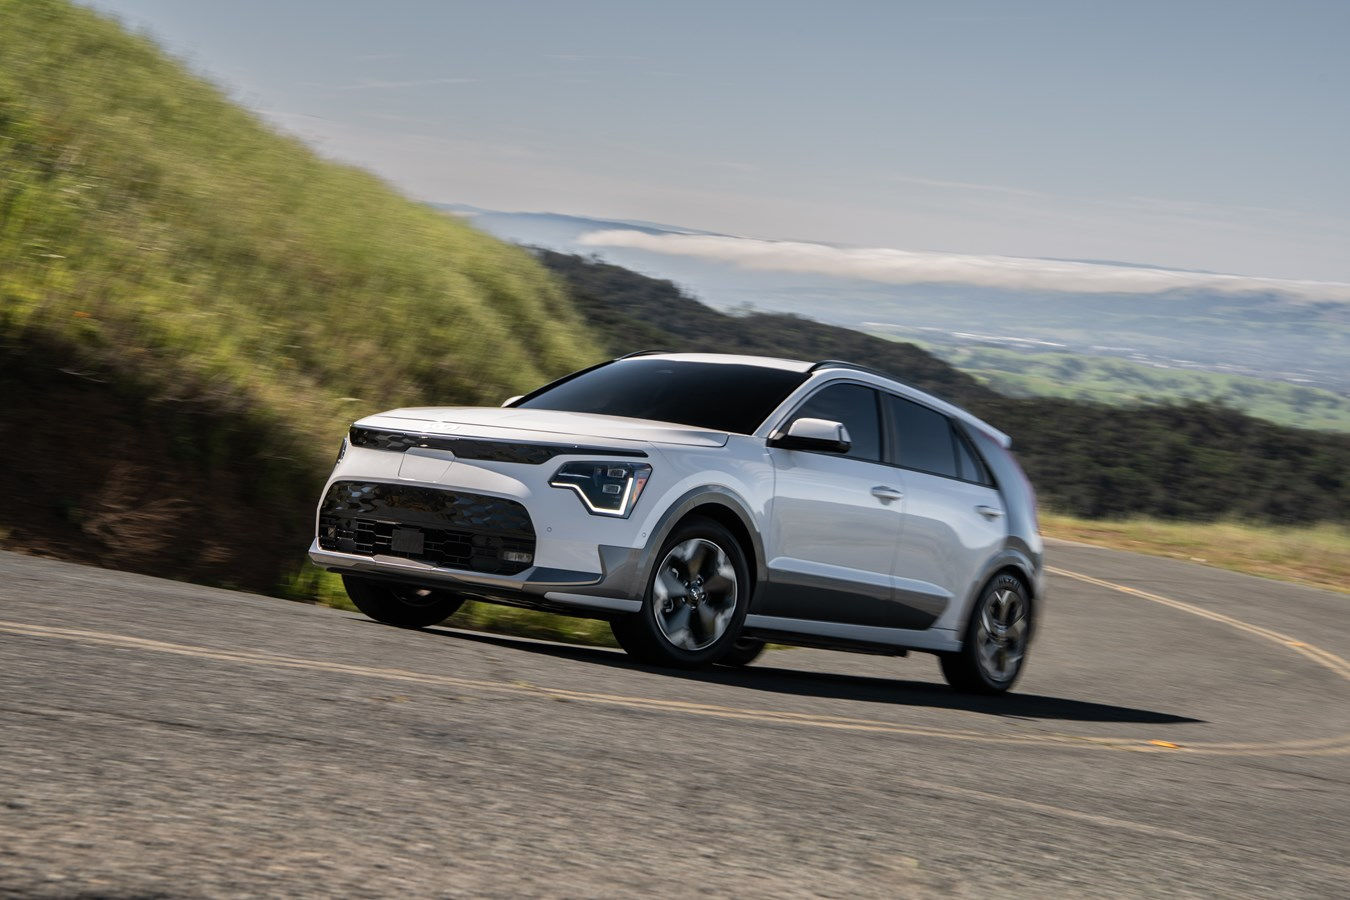 Front side view of the electric Kia Niro EV on the road in elevation